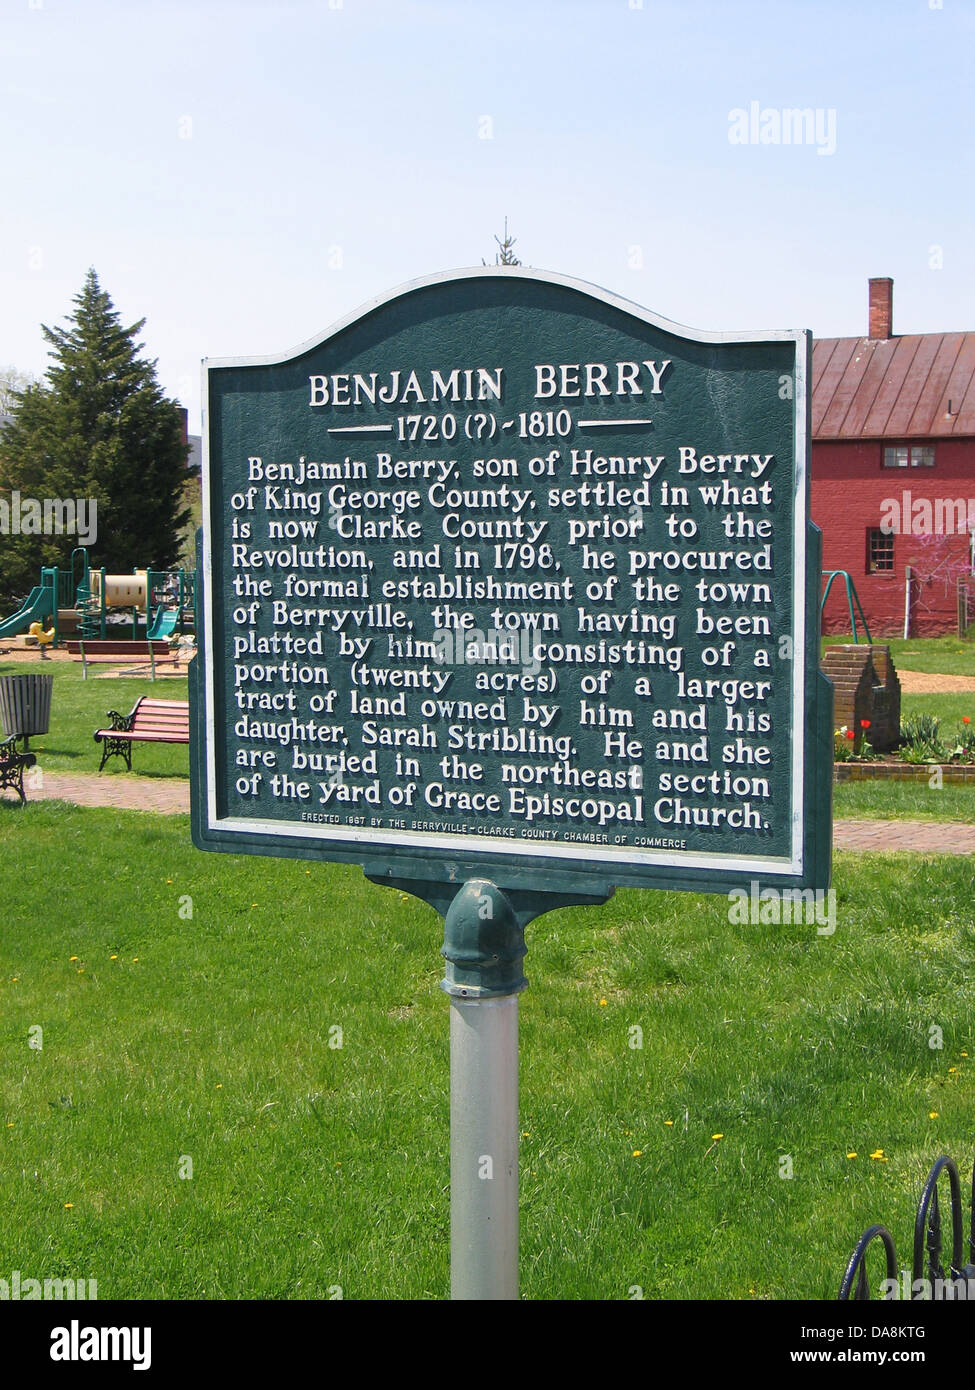 BENJAMIN BERRY Benjamin Berry, son of Henry Berry of King George County, settled what is now Clarke County prior to the Revolution, and in 1798, he procured the formal establishment of the town of Berryville, the town having been platted by him, and consisting of a portion (twenty acres) of a larger tract of land owned by him and his daughter, Sarah Stribling. He and she are buried in the northeast section of the yard of Grace Episcopal Church. Erected 1967 by the Berryville-Clarke County Chamber of Commerce Stock Photo